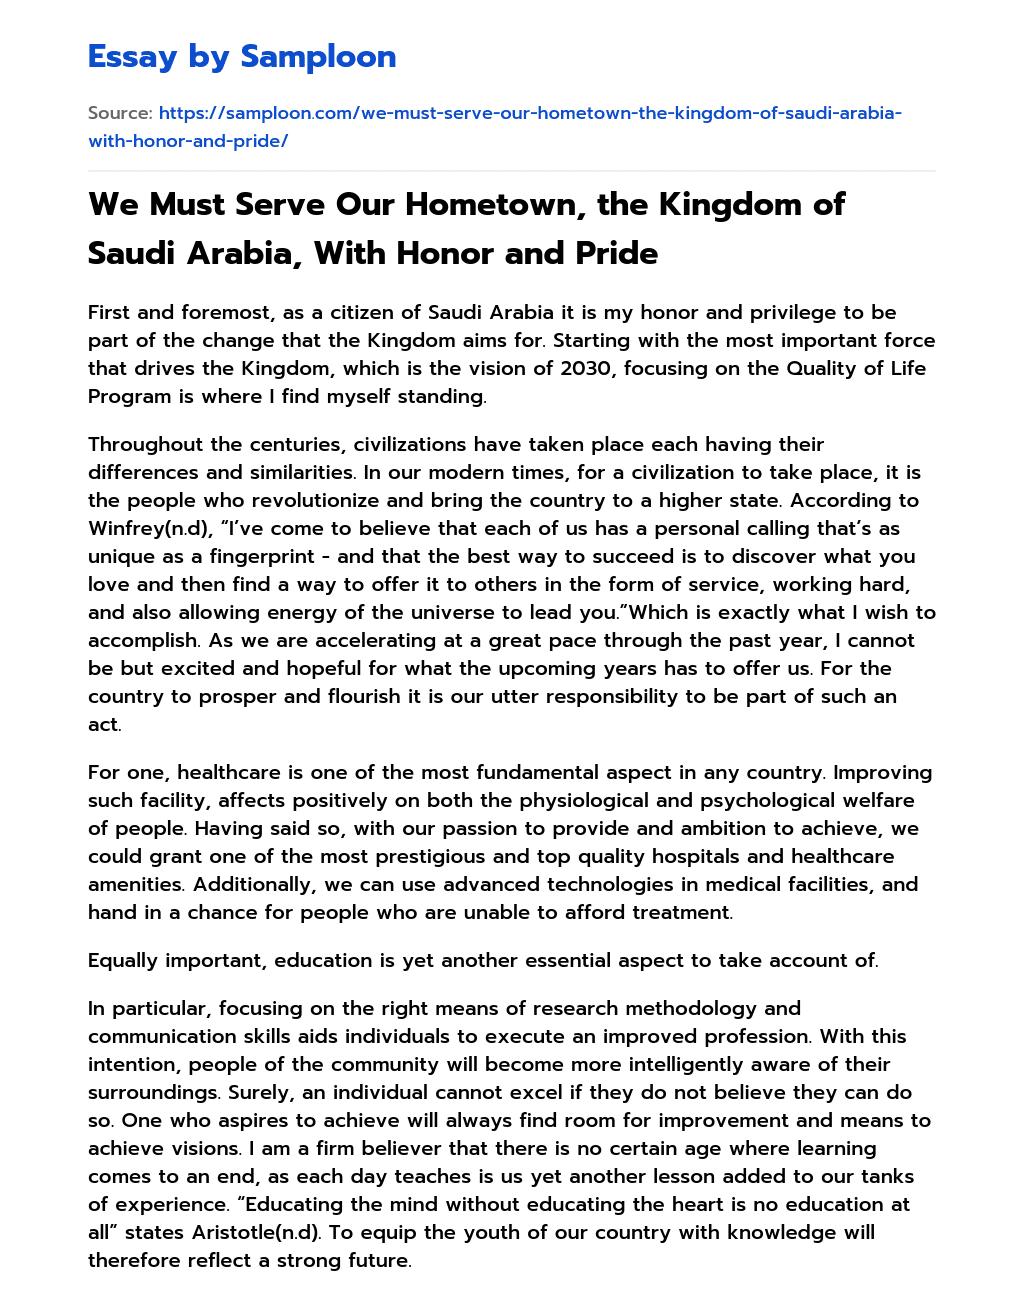 We Must Serve Our Hometown, the Kingdom of Saudi Arabia, With Honor and Pride essay